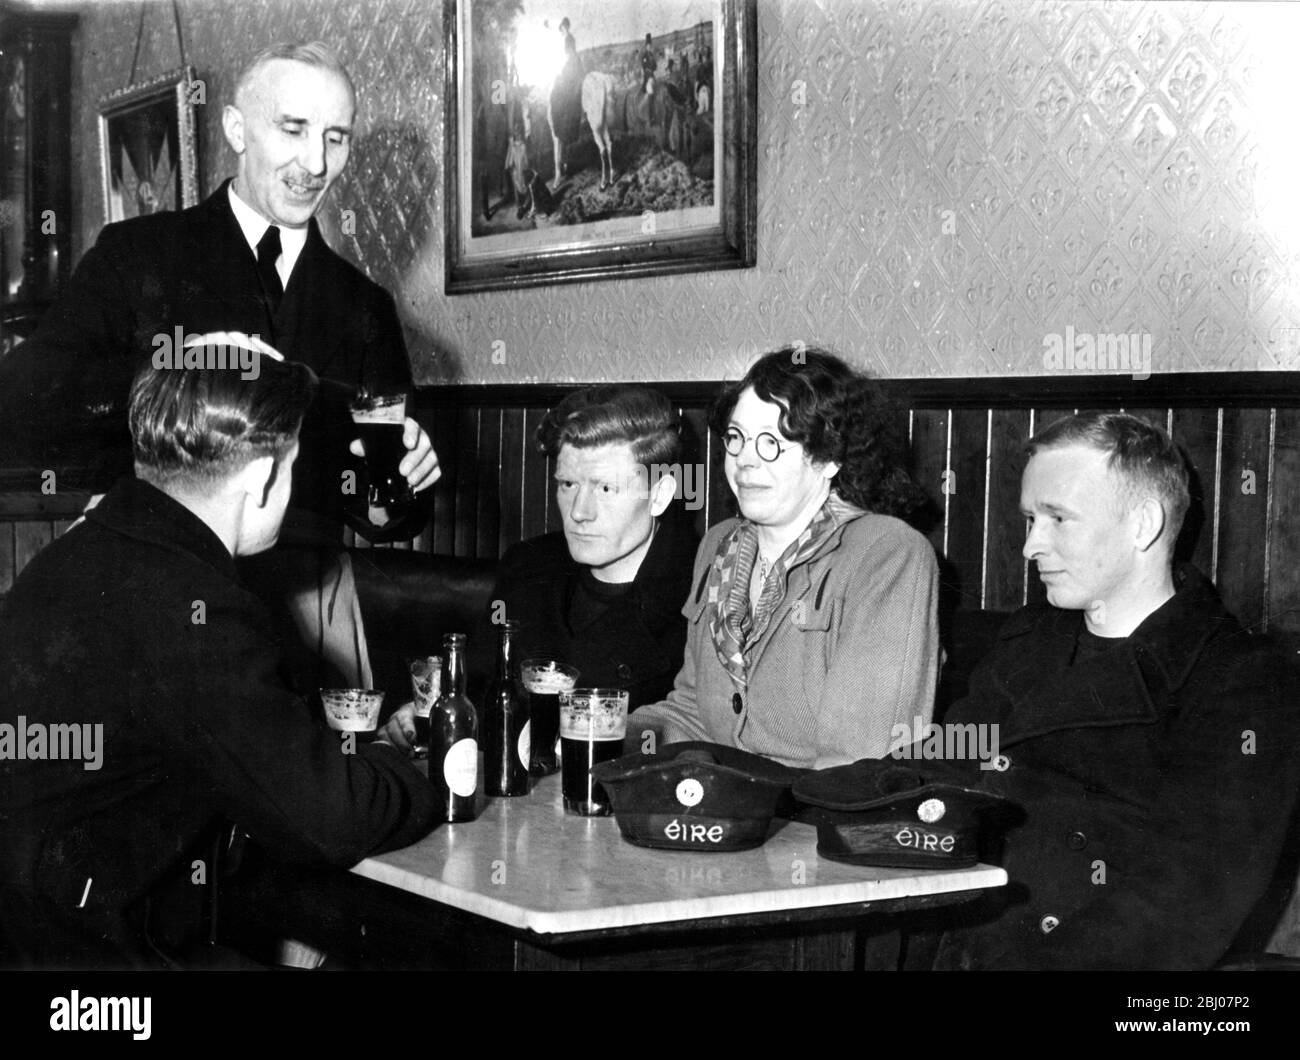 Sailors of the Eire navy are regular customers at Downey's Select Bar where a strick of barmen has lasted ten years . With their girlfriends they have nightly sing songs in the pub . - 12 March 1949 Stock Photo